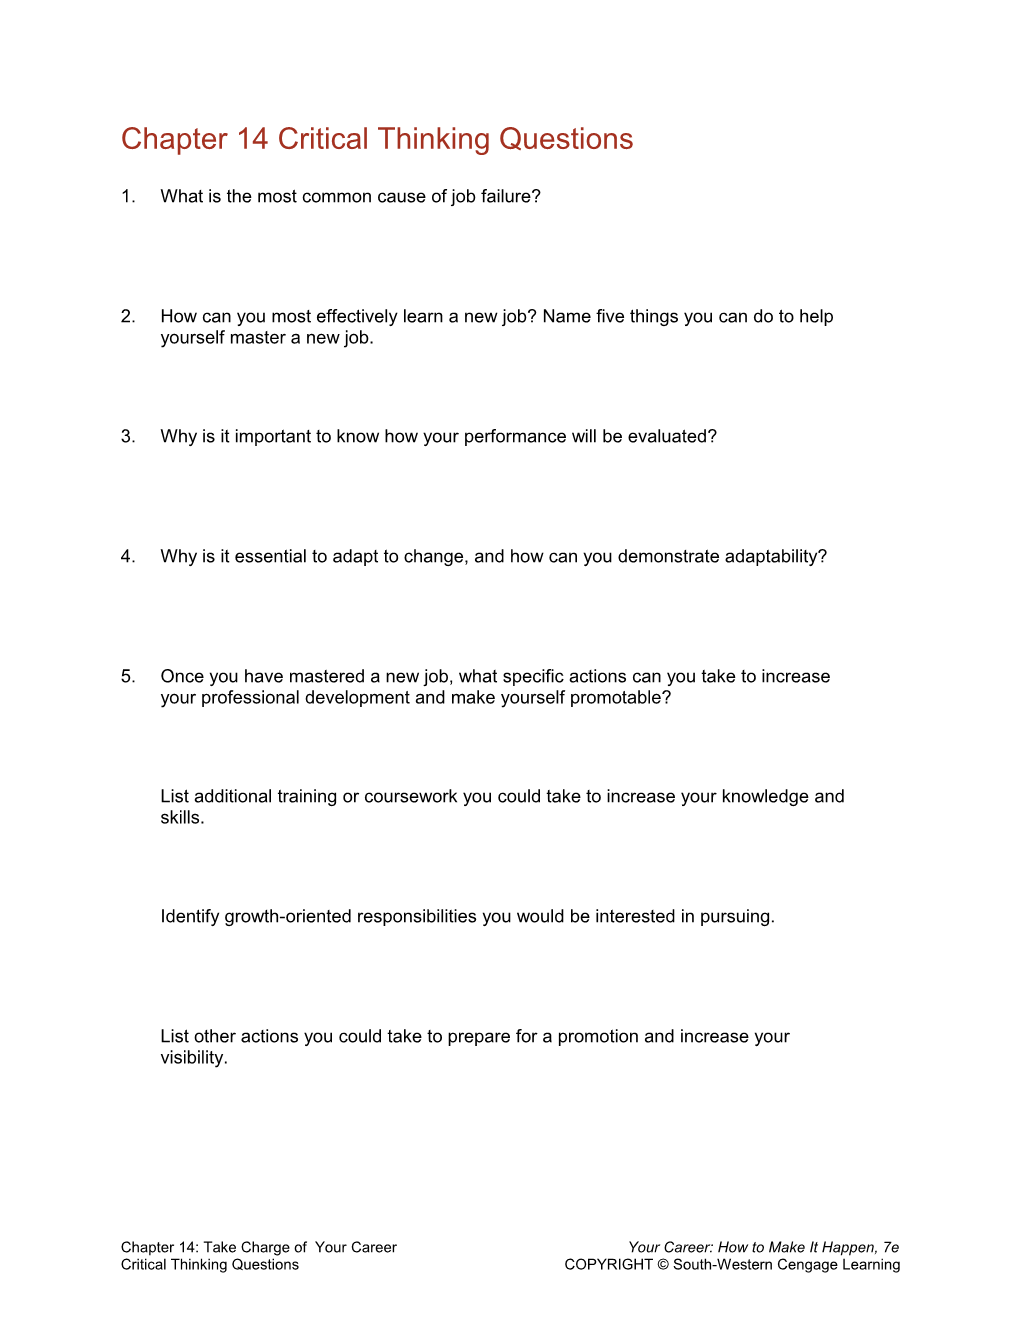 Chapter 14 Critical Thinking Questions